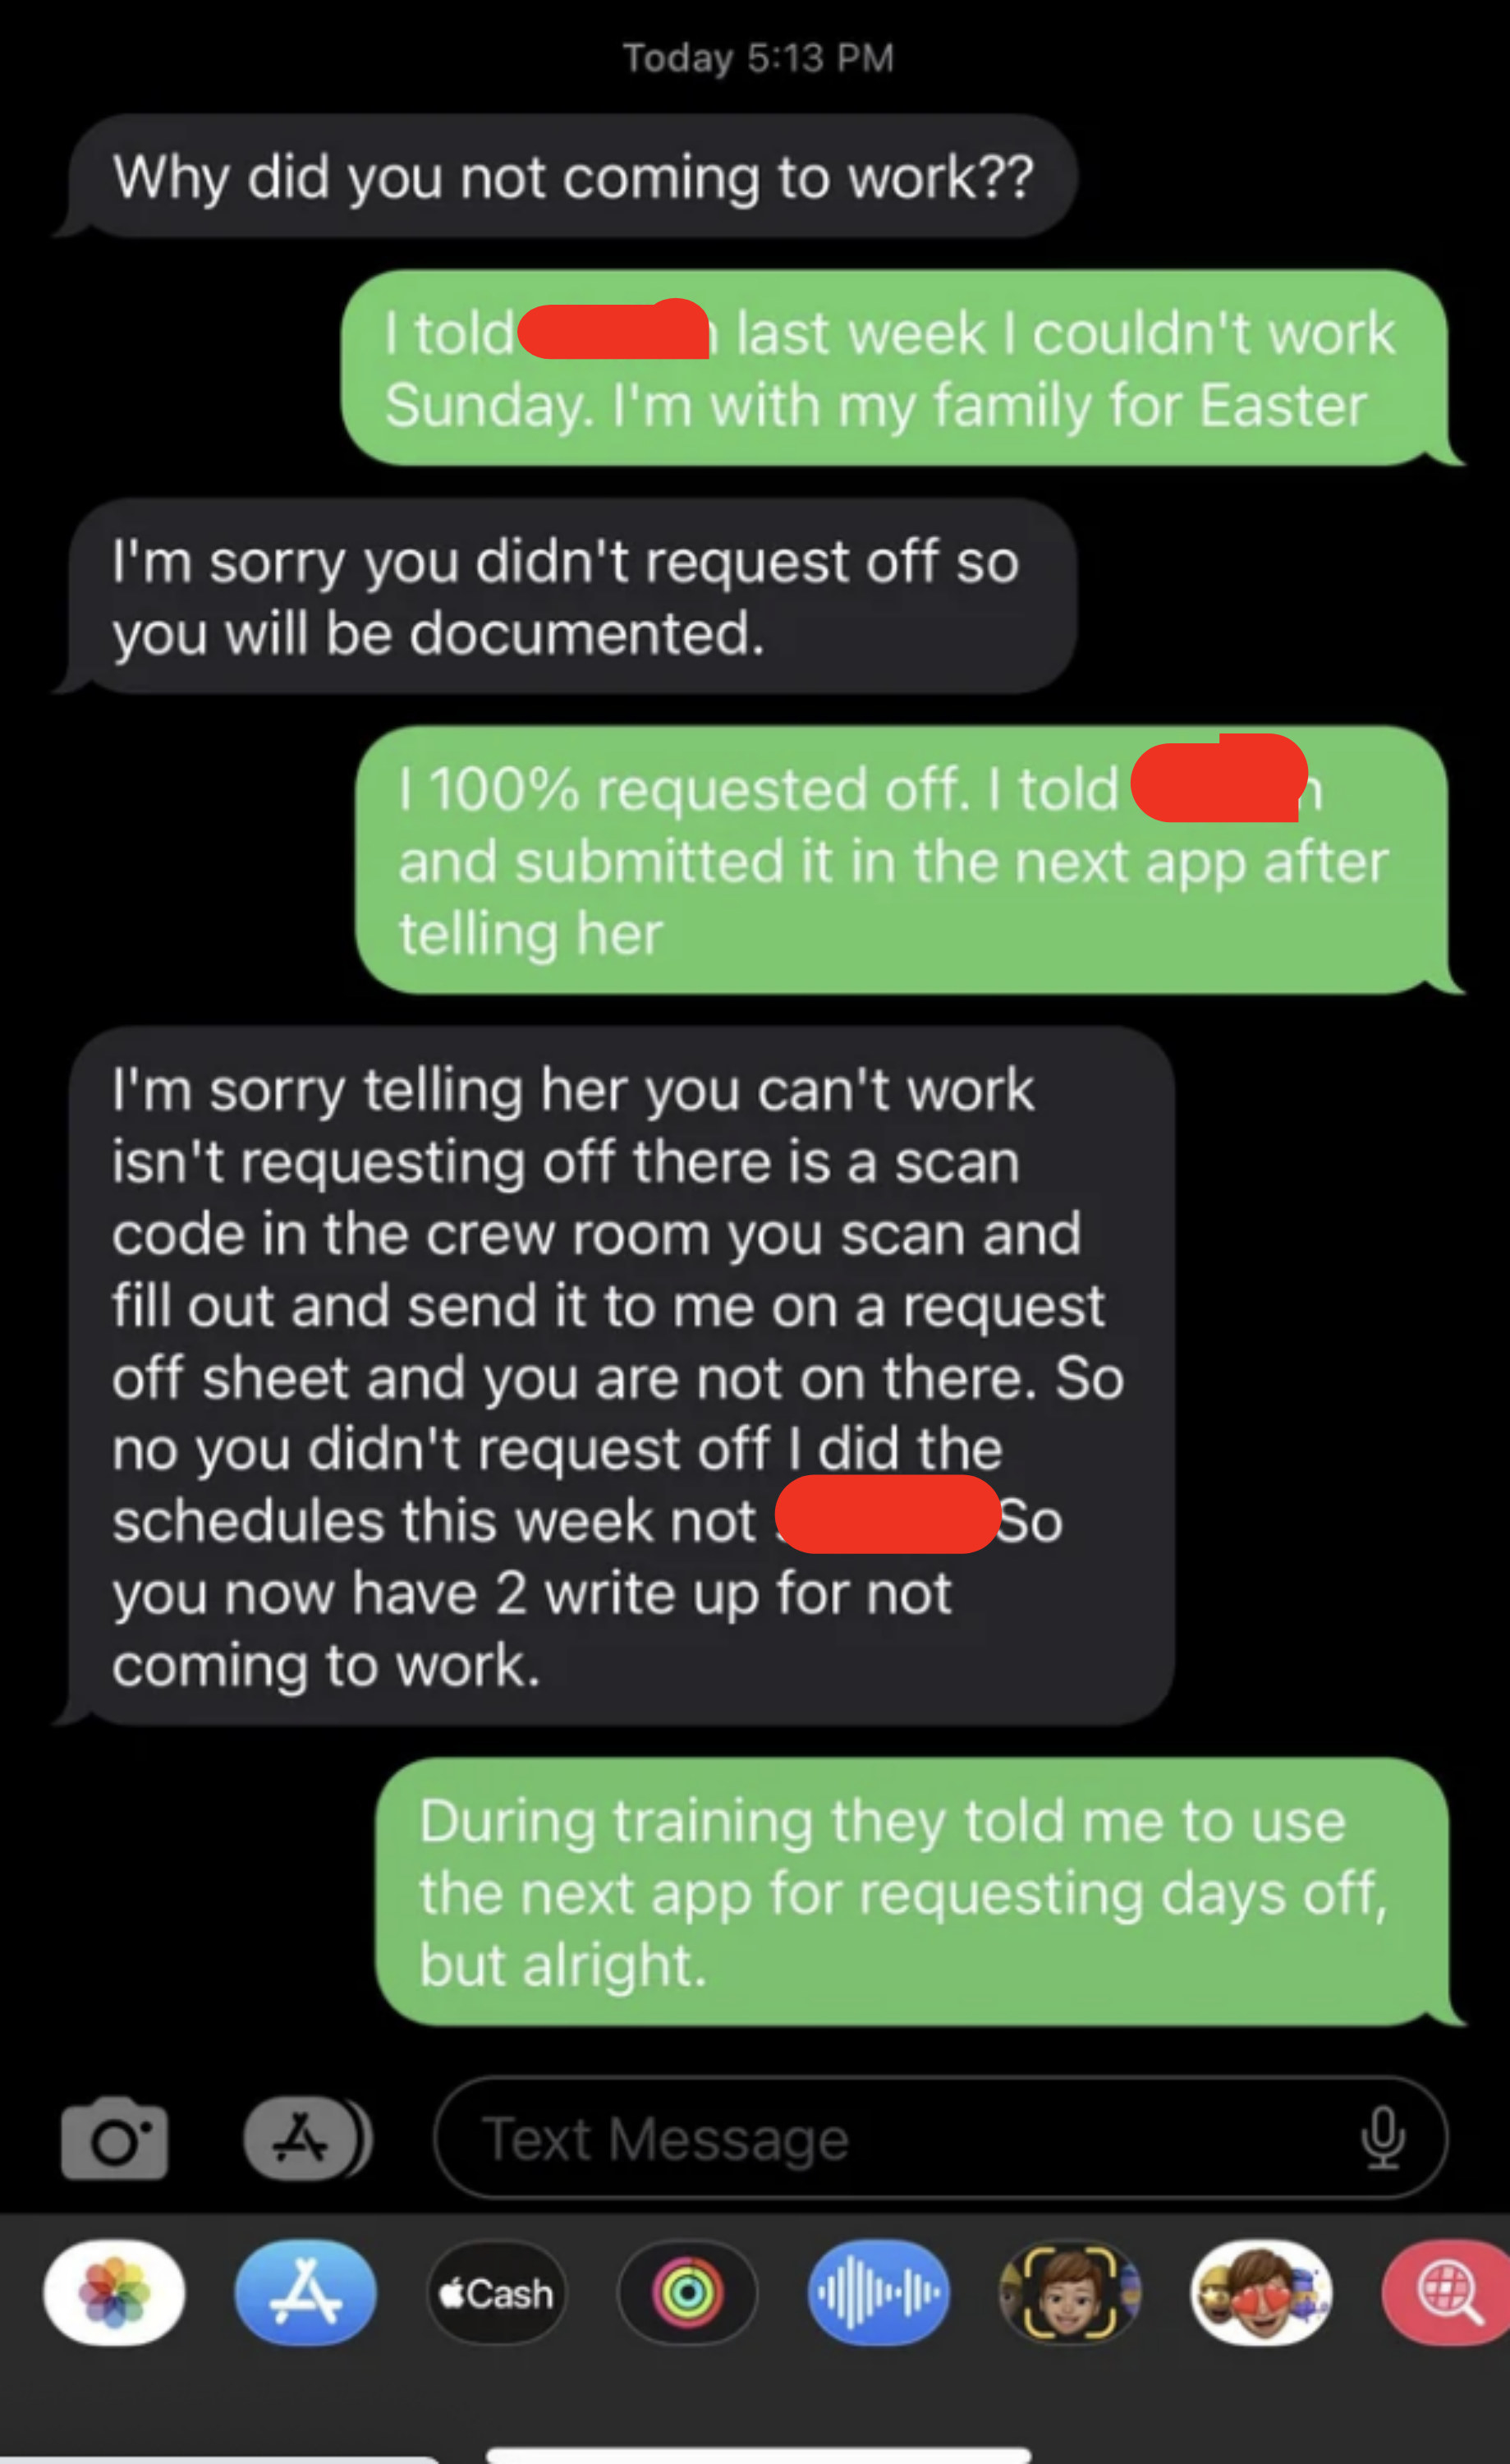 boss message that the procedure employee used to request time off wasn&#x27;t actually sufficient and they now have a write up